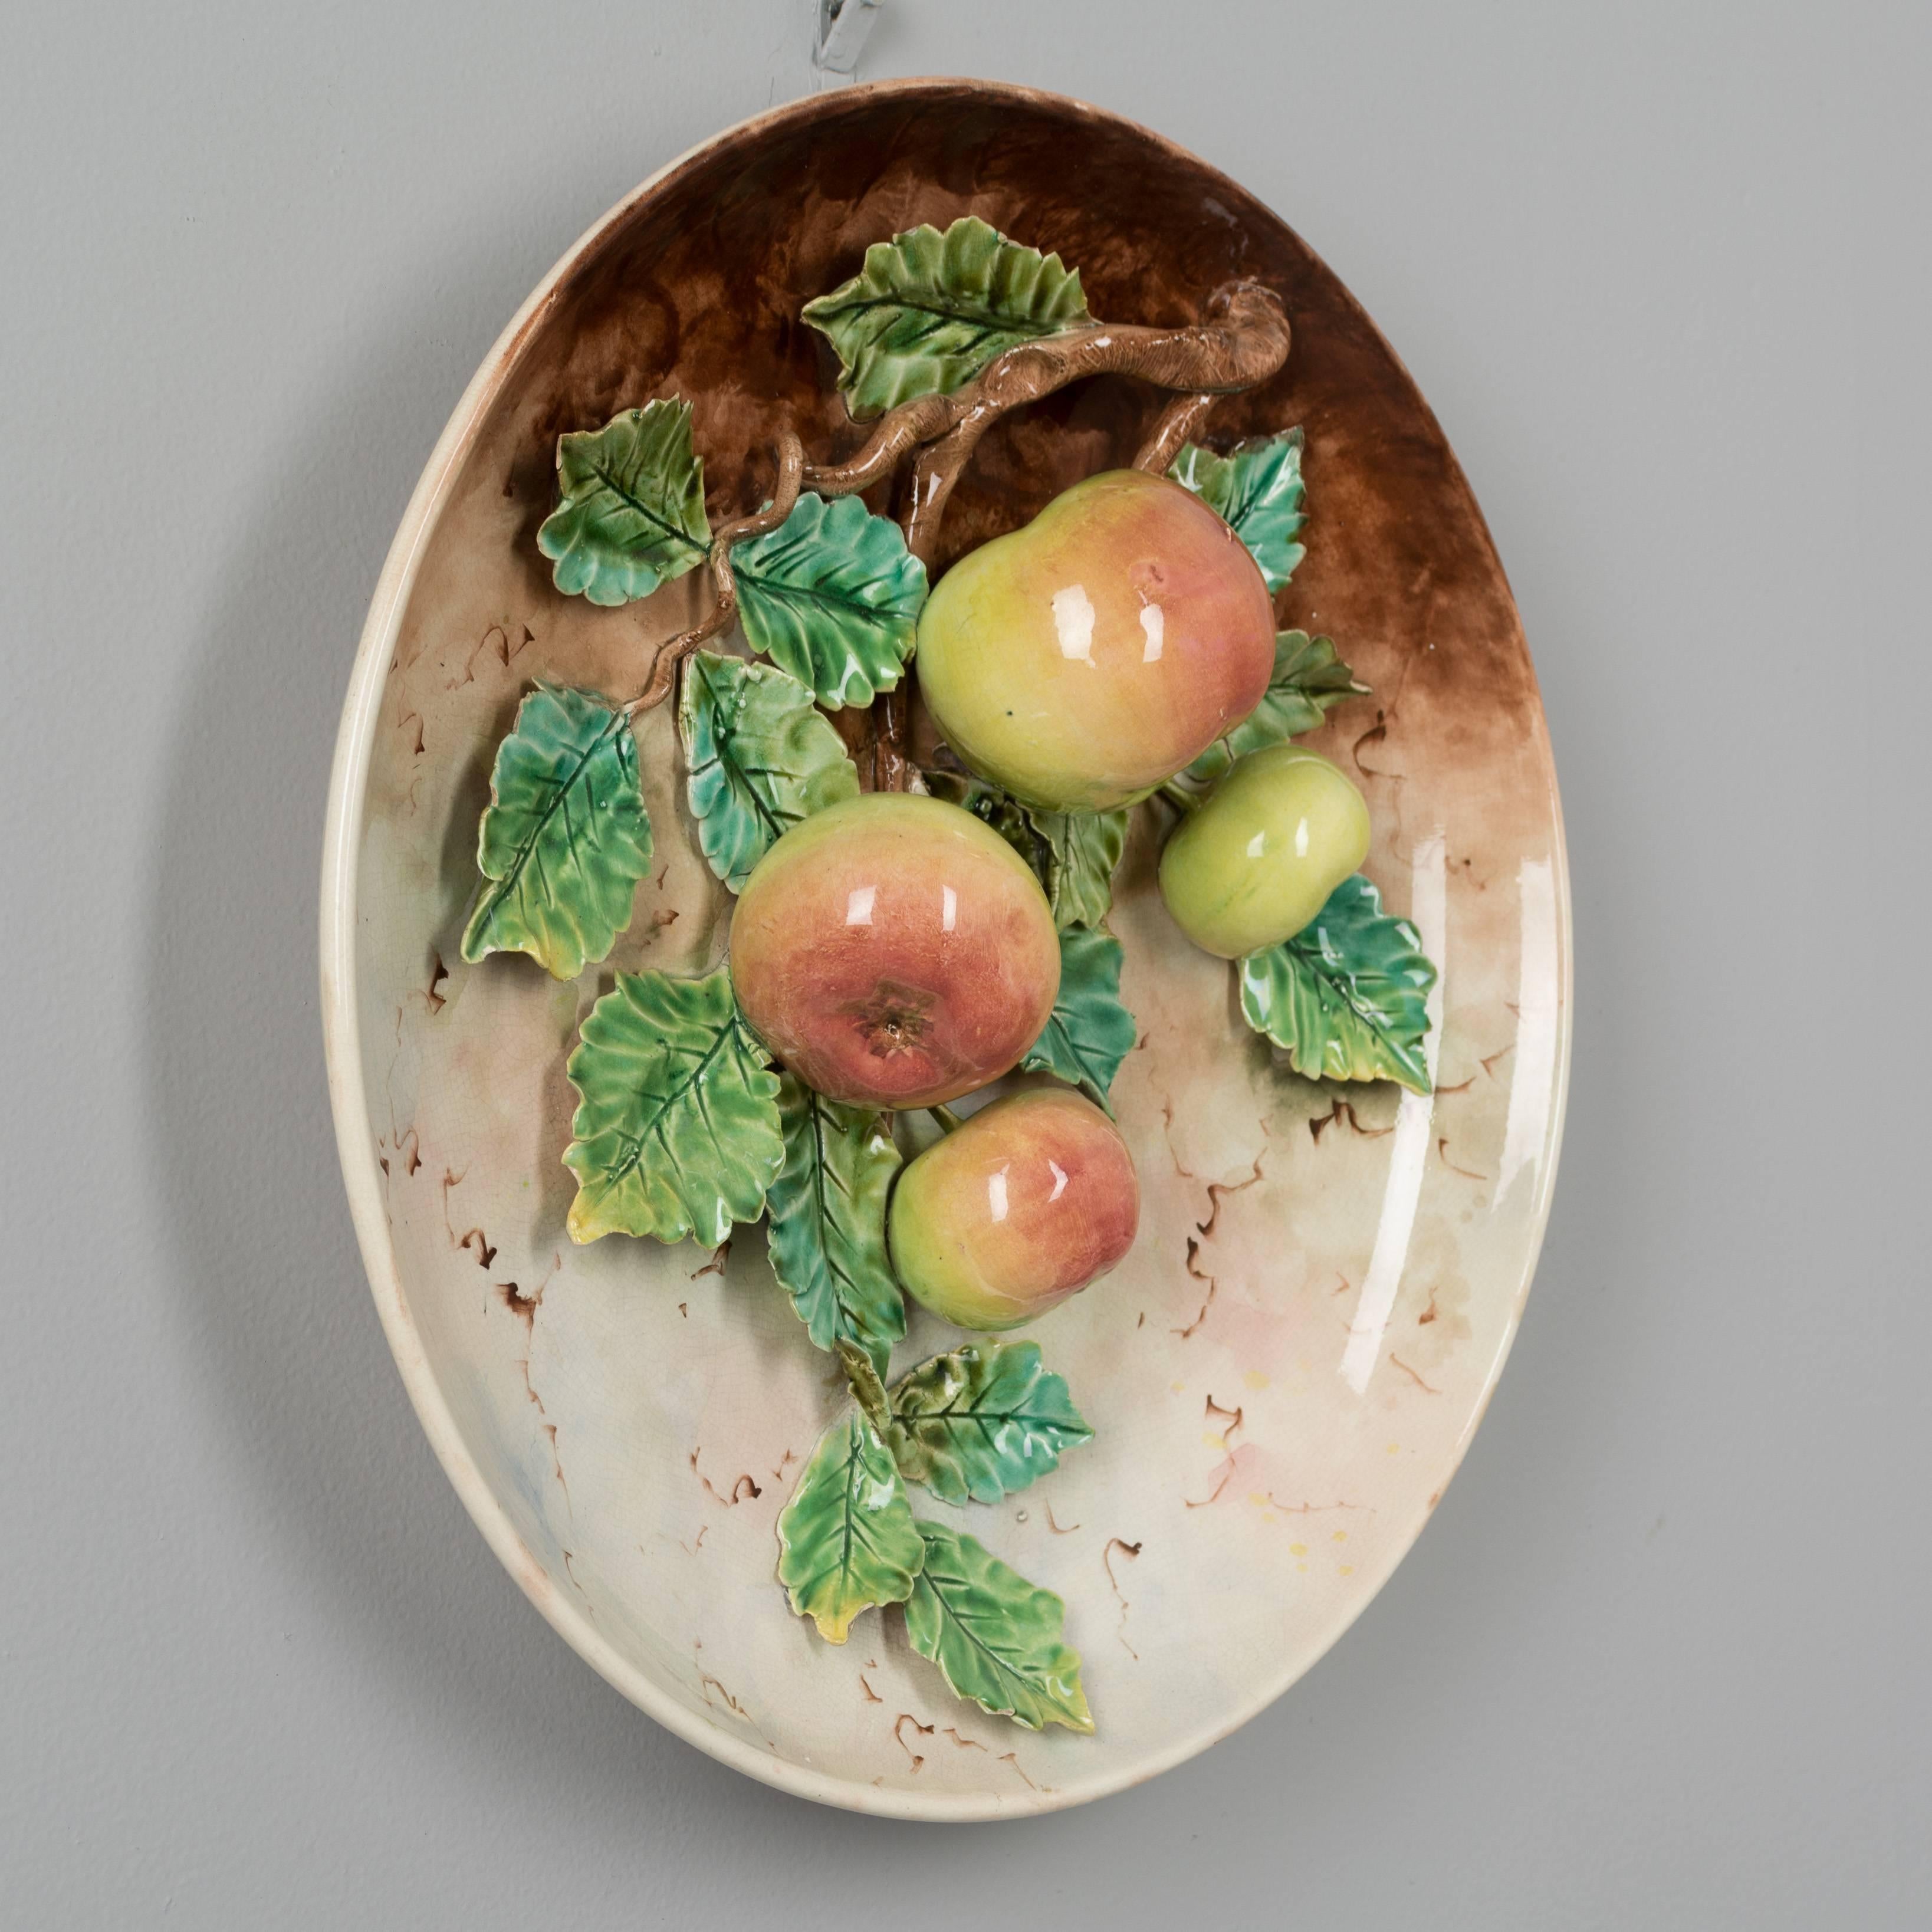 A large 19th century French Barbotine Majolica platter with four red and yellow apples hanging from a tree branch covered with green leaves. Sculpted in high relief and hand-painted with vivid color. Good condition with minor loss on one leaf. We